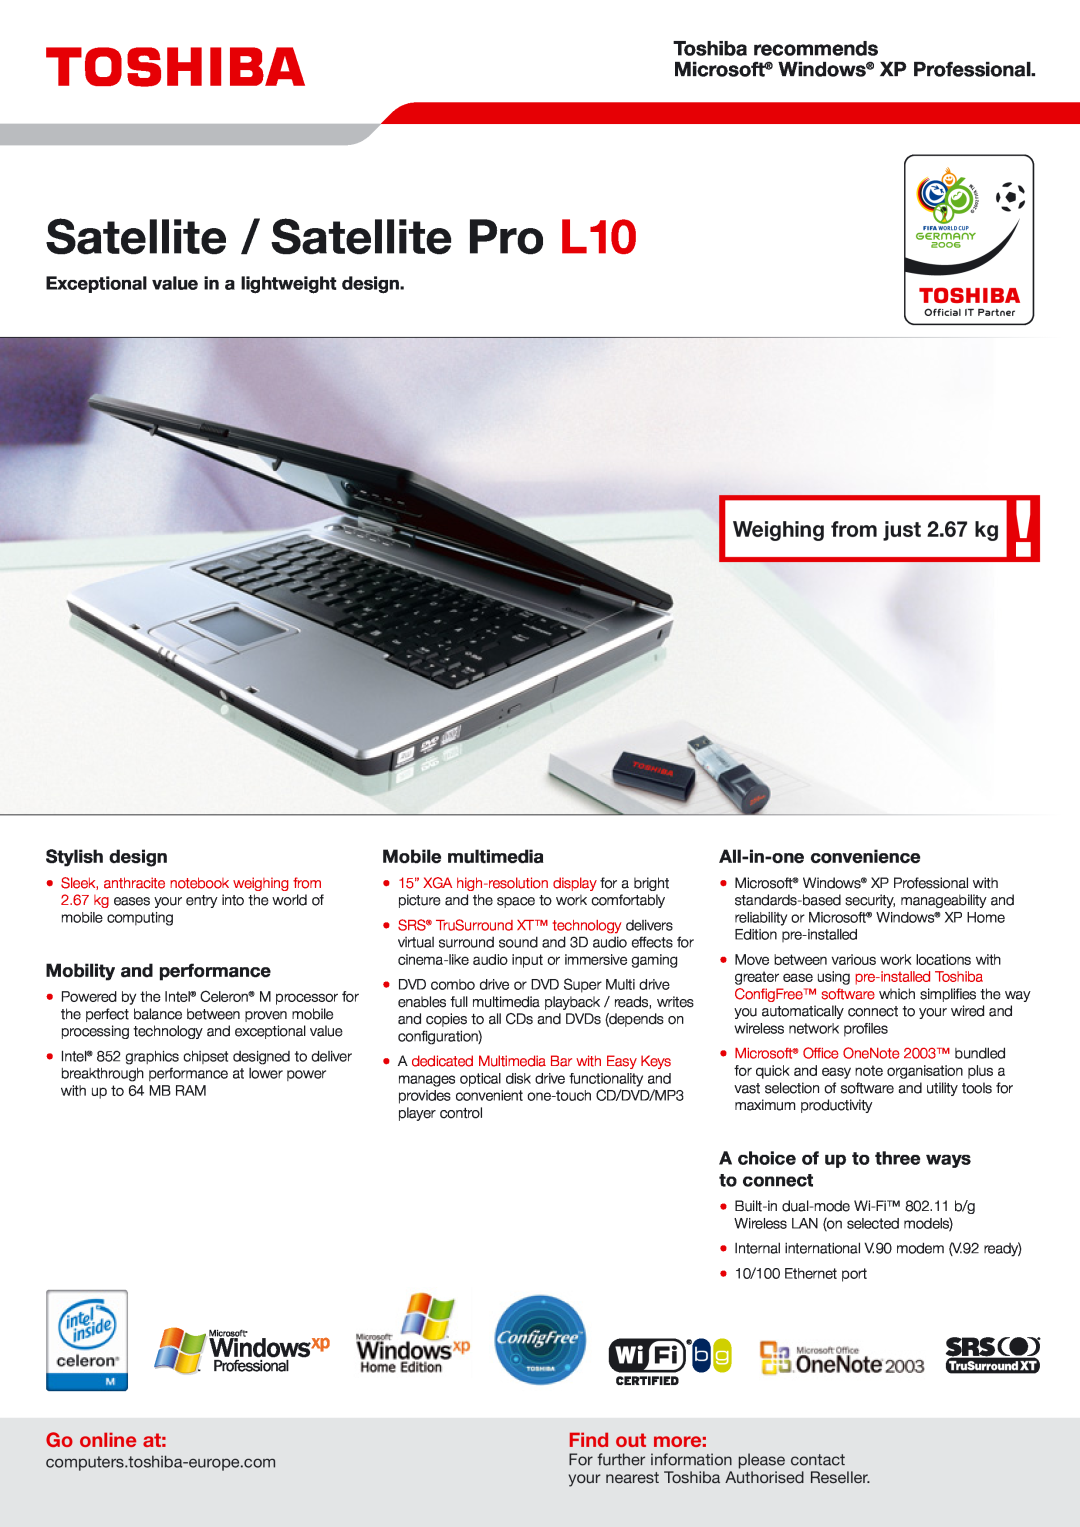 Toshiba Pro L10 manual Go online at, Find out more, computers.toshiba-europe.com, For further information please contact 